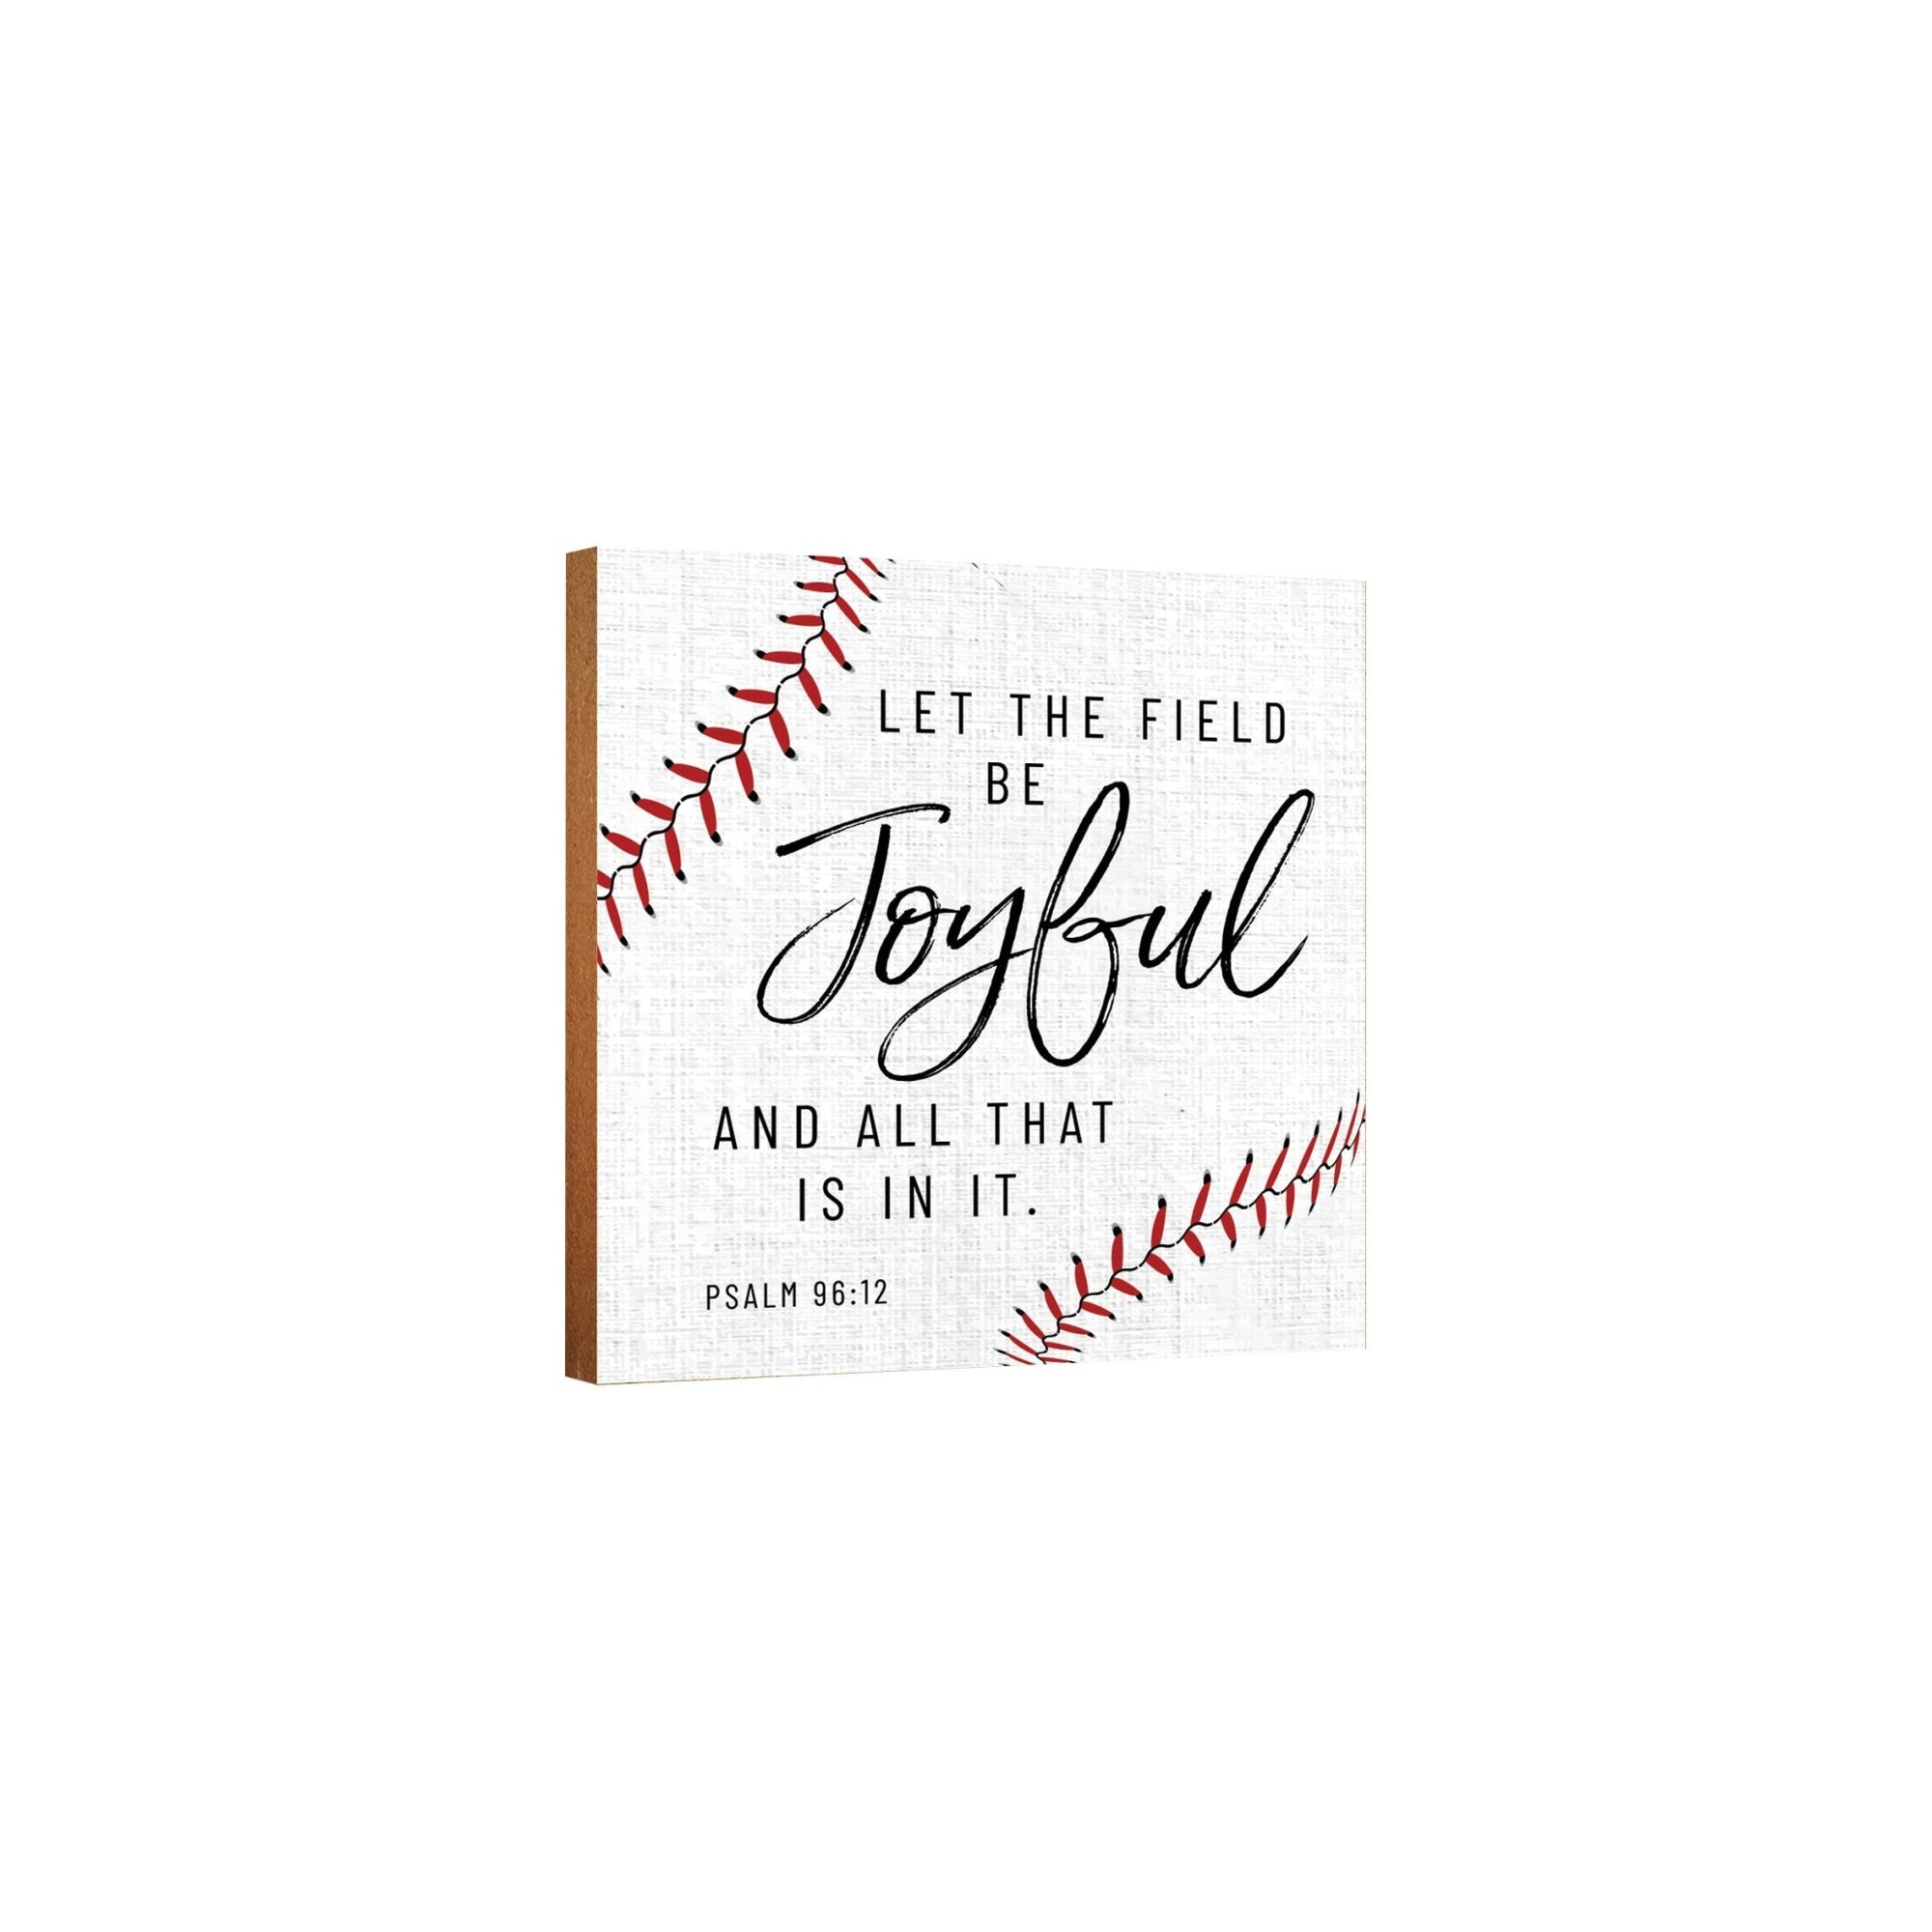 Rustic Wooden Baseball Shadow Box Shelf Décor With Inspiring Bible Verses - Let The Field - LifeSong Milestones